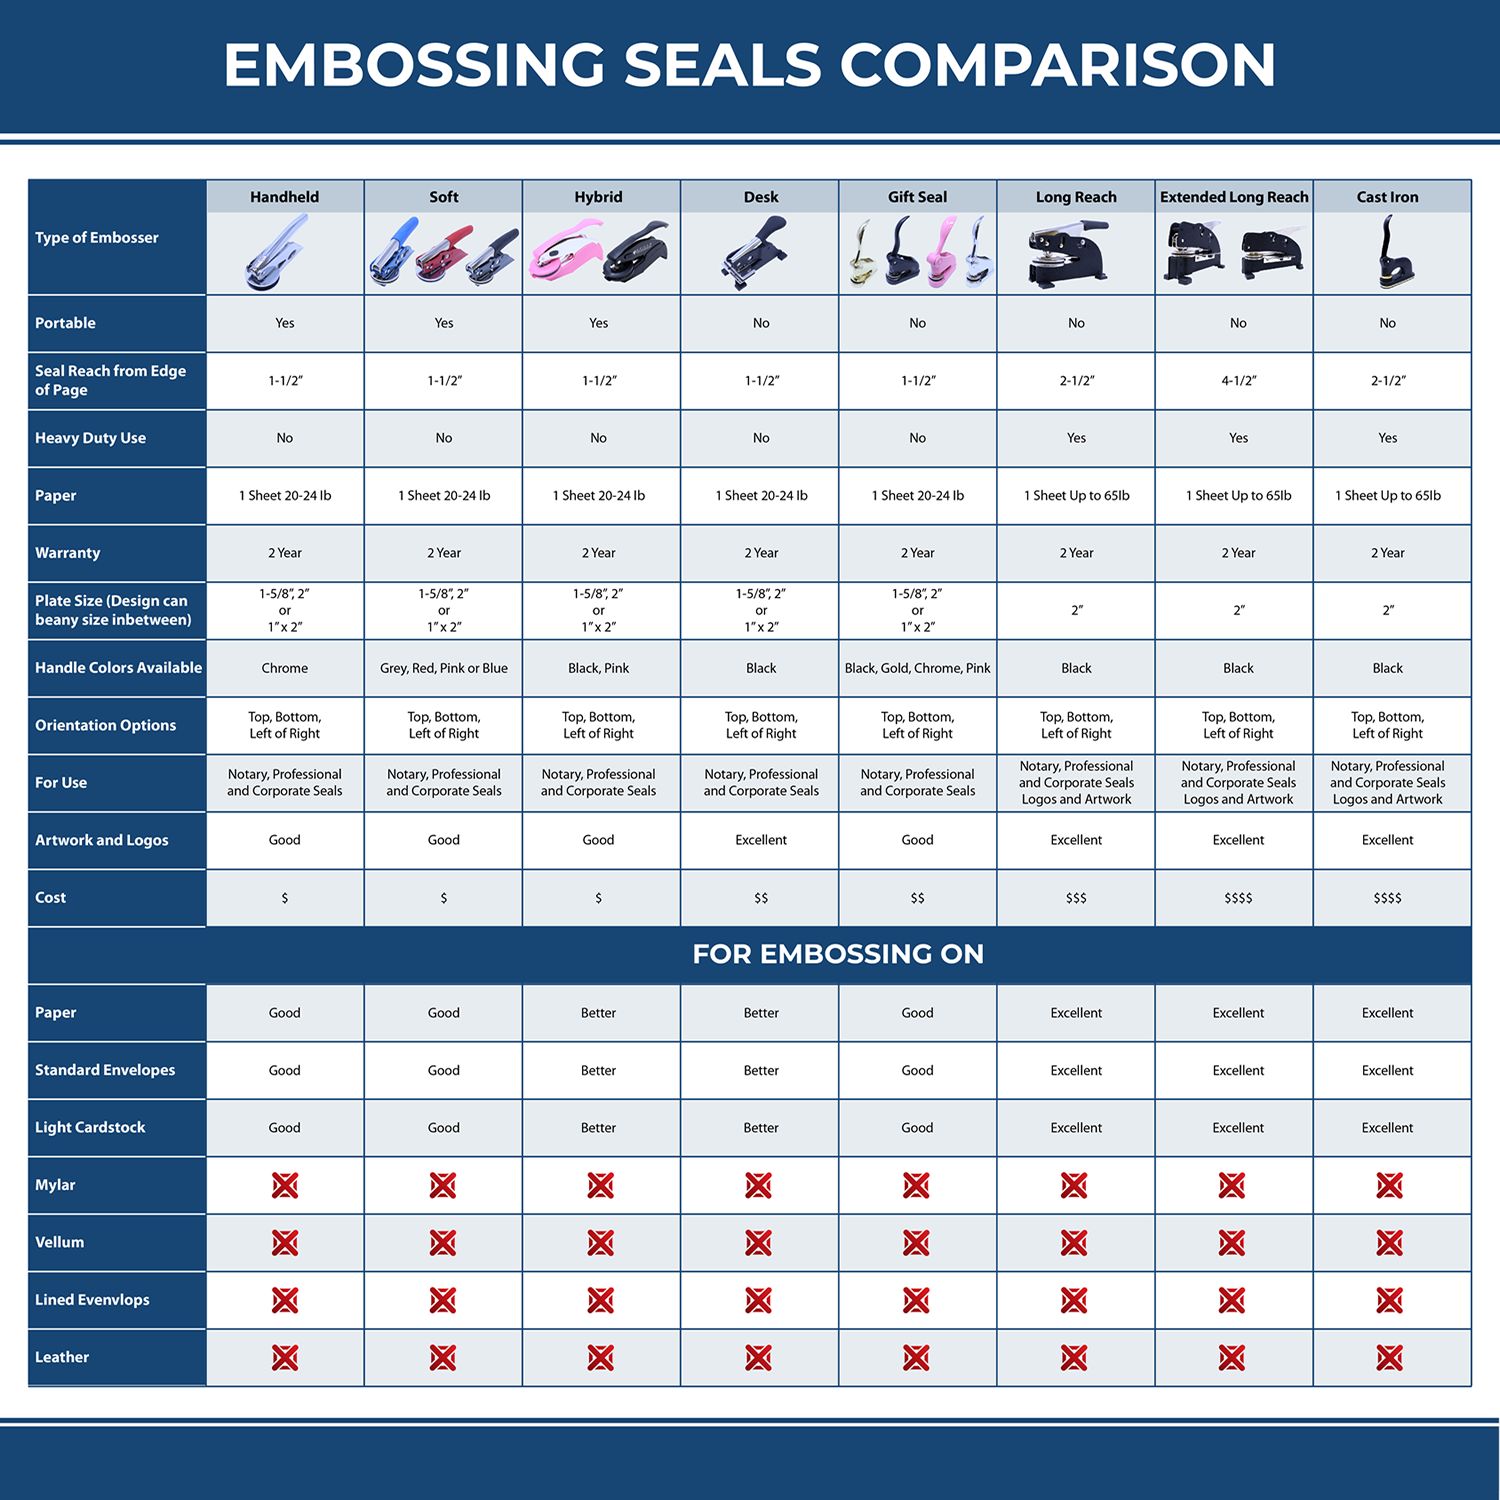 A comparison chart for the different types of mount models available for the Heavy Duty Tennessee Landscape Architect Cast Iron Embosser.